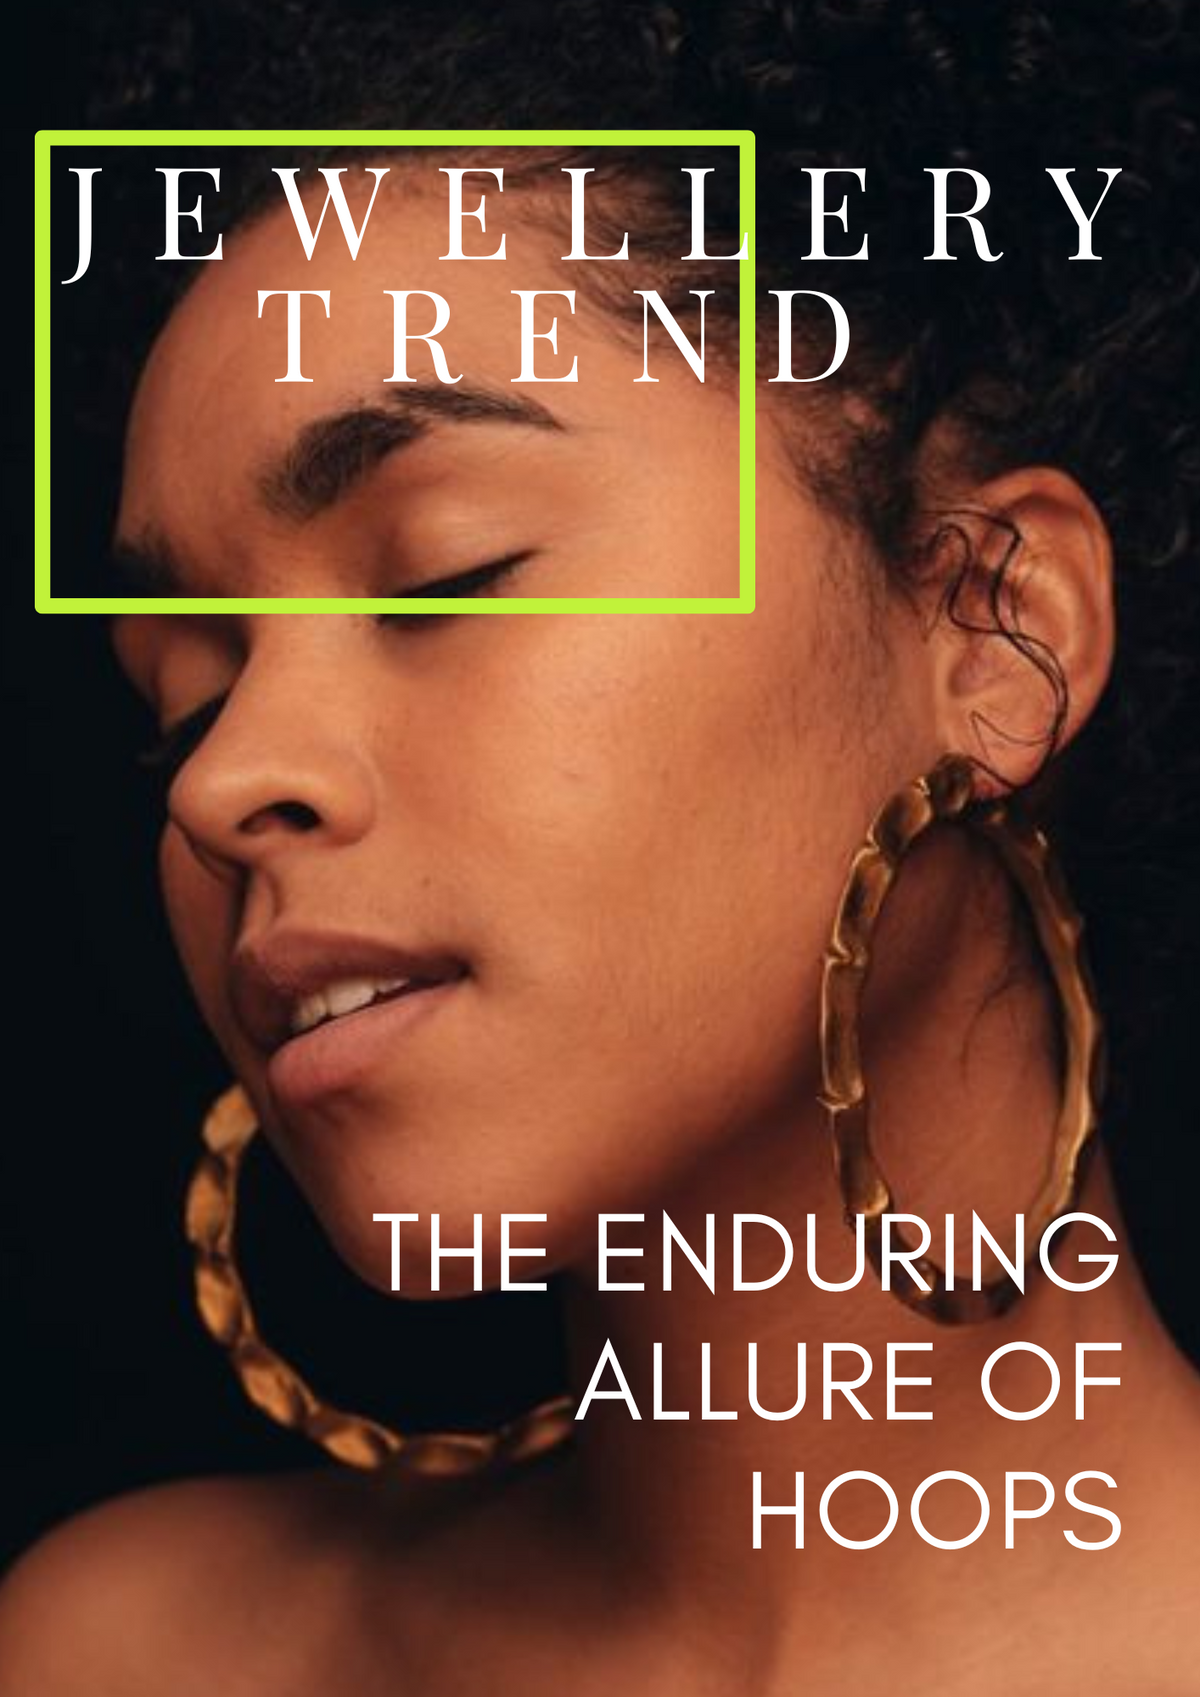 Jewellery Trend The Enduring Allure of Hoops From Cultural Pride to Versatile Fashion Statement